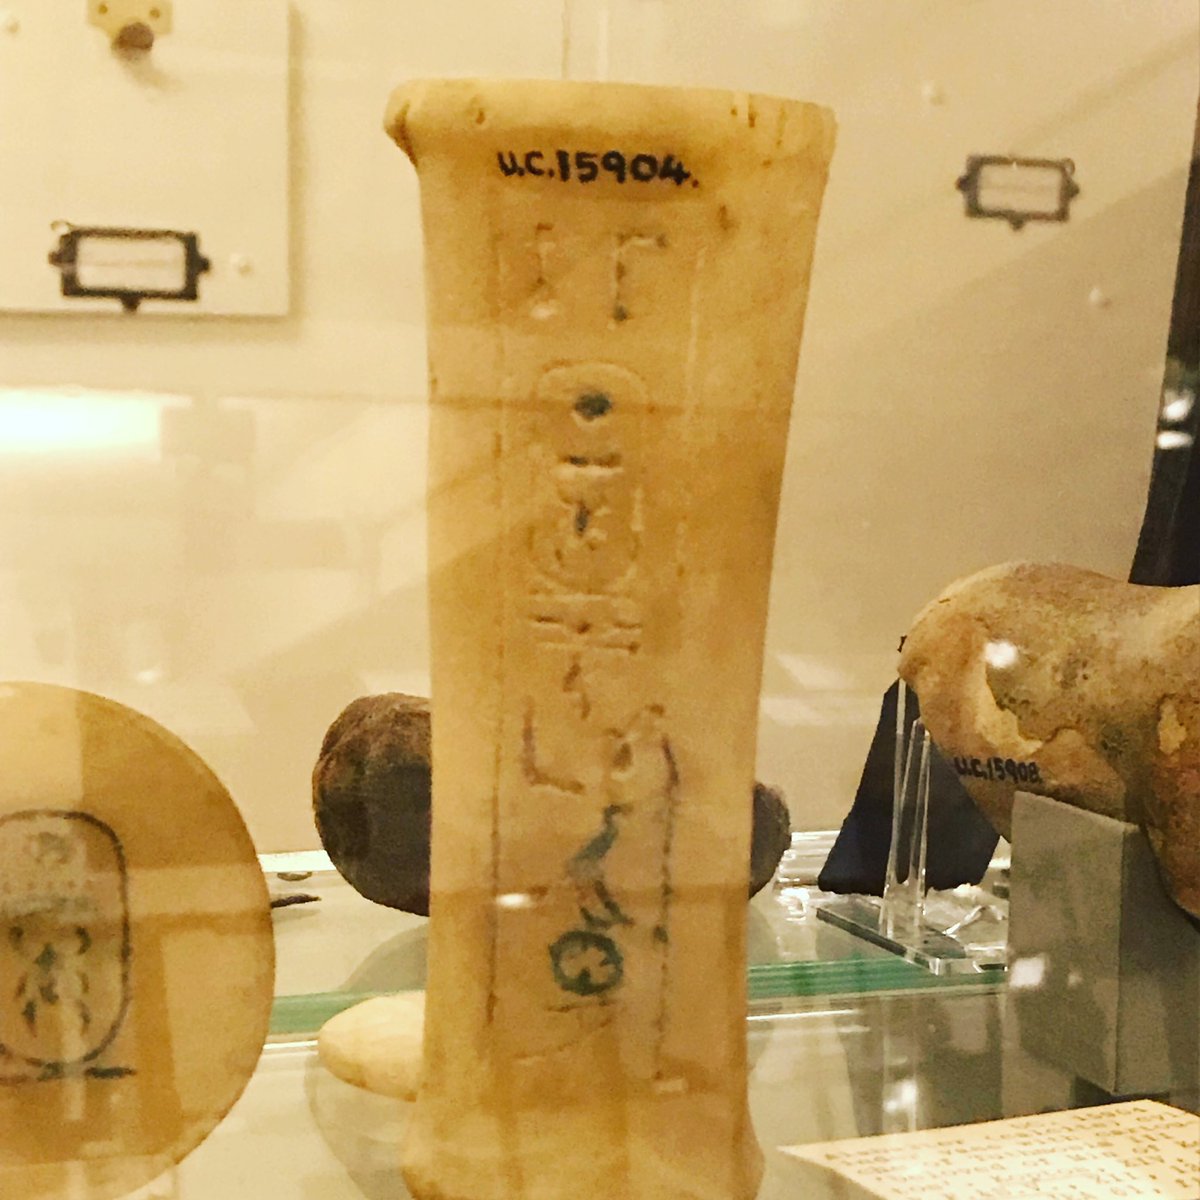 (5) Hatshepsut’s mortuary temple, Deir el-Bahari, on the West Bank, opposite Karnak Temple.The cartouche contains the name of the female ruler. The resin retains a very faint scent of myrrh (apologies for mistake in previous tweet-myrrh, not cedar) #MuseumsUnlocked